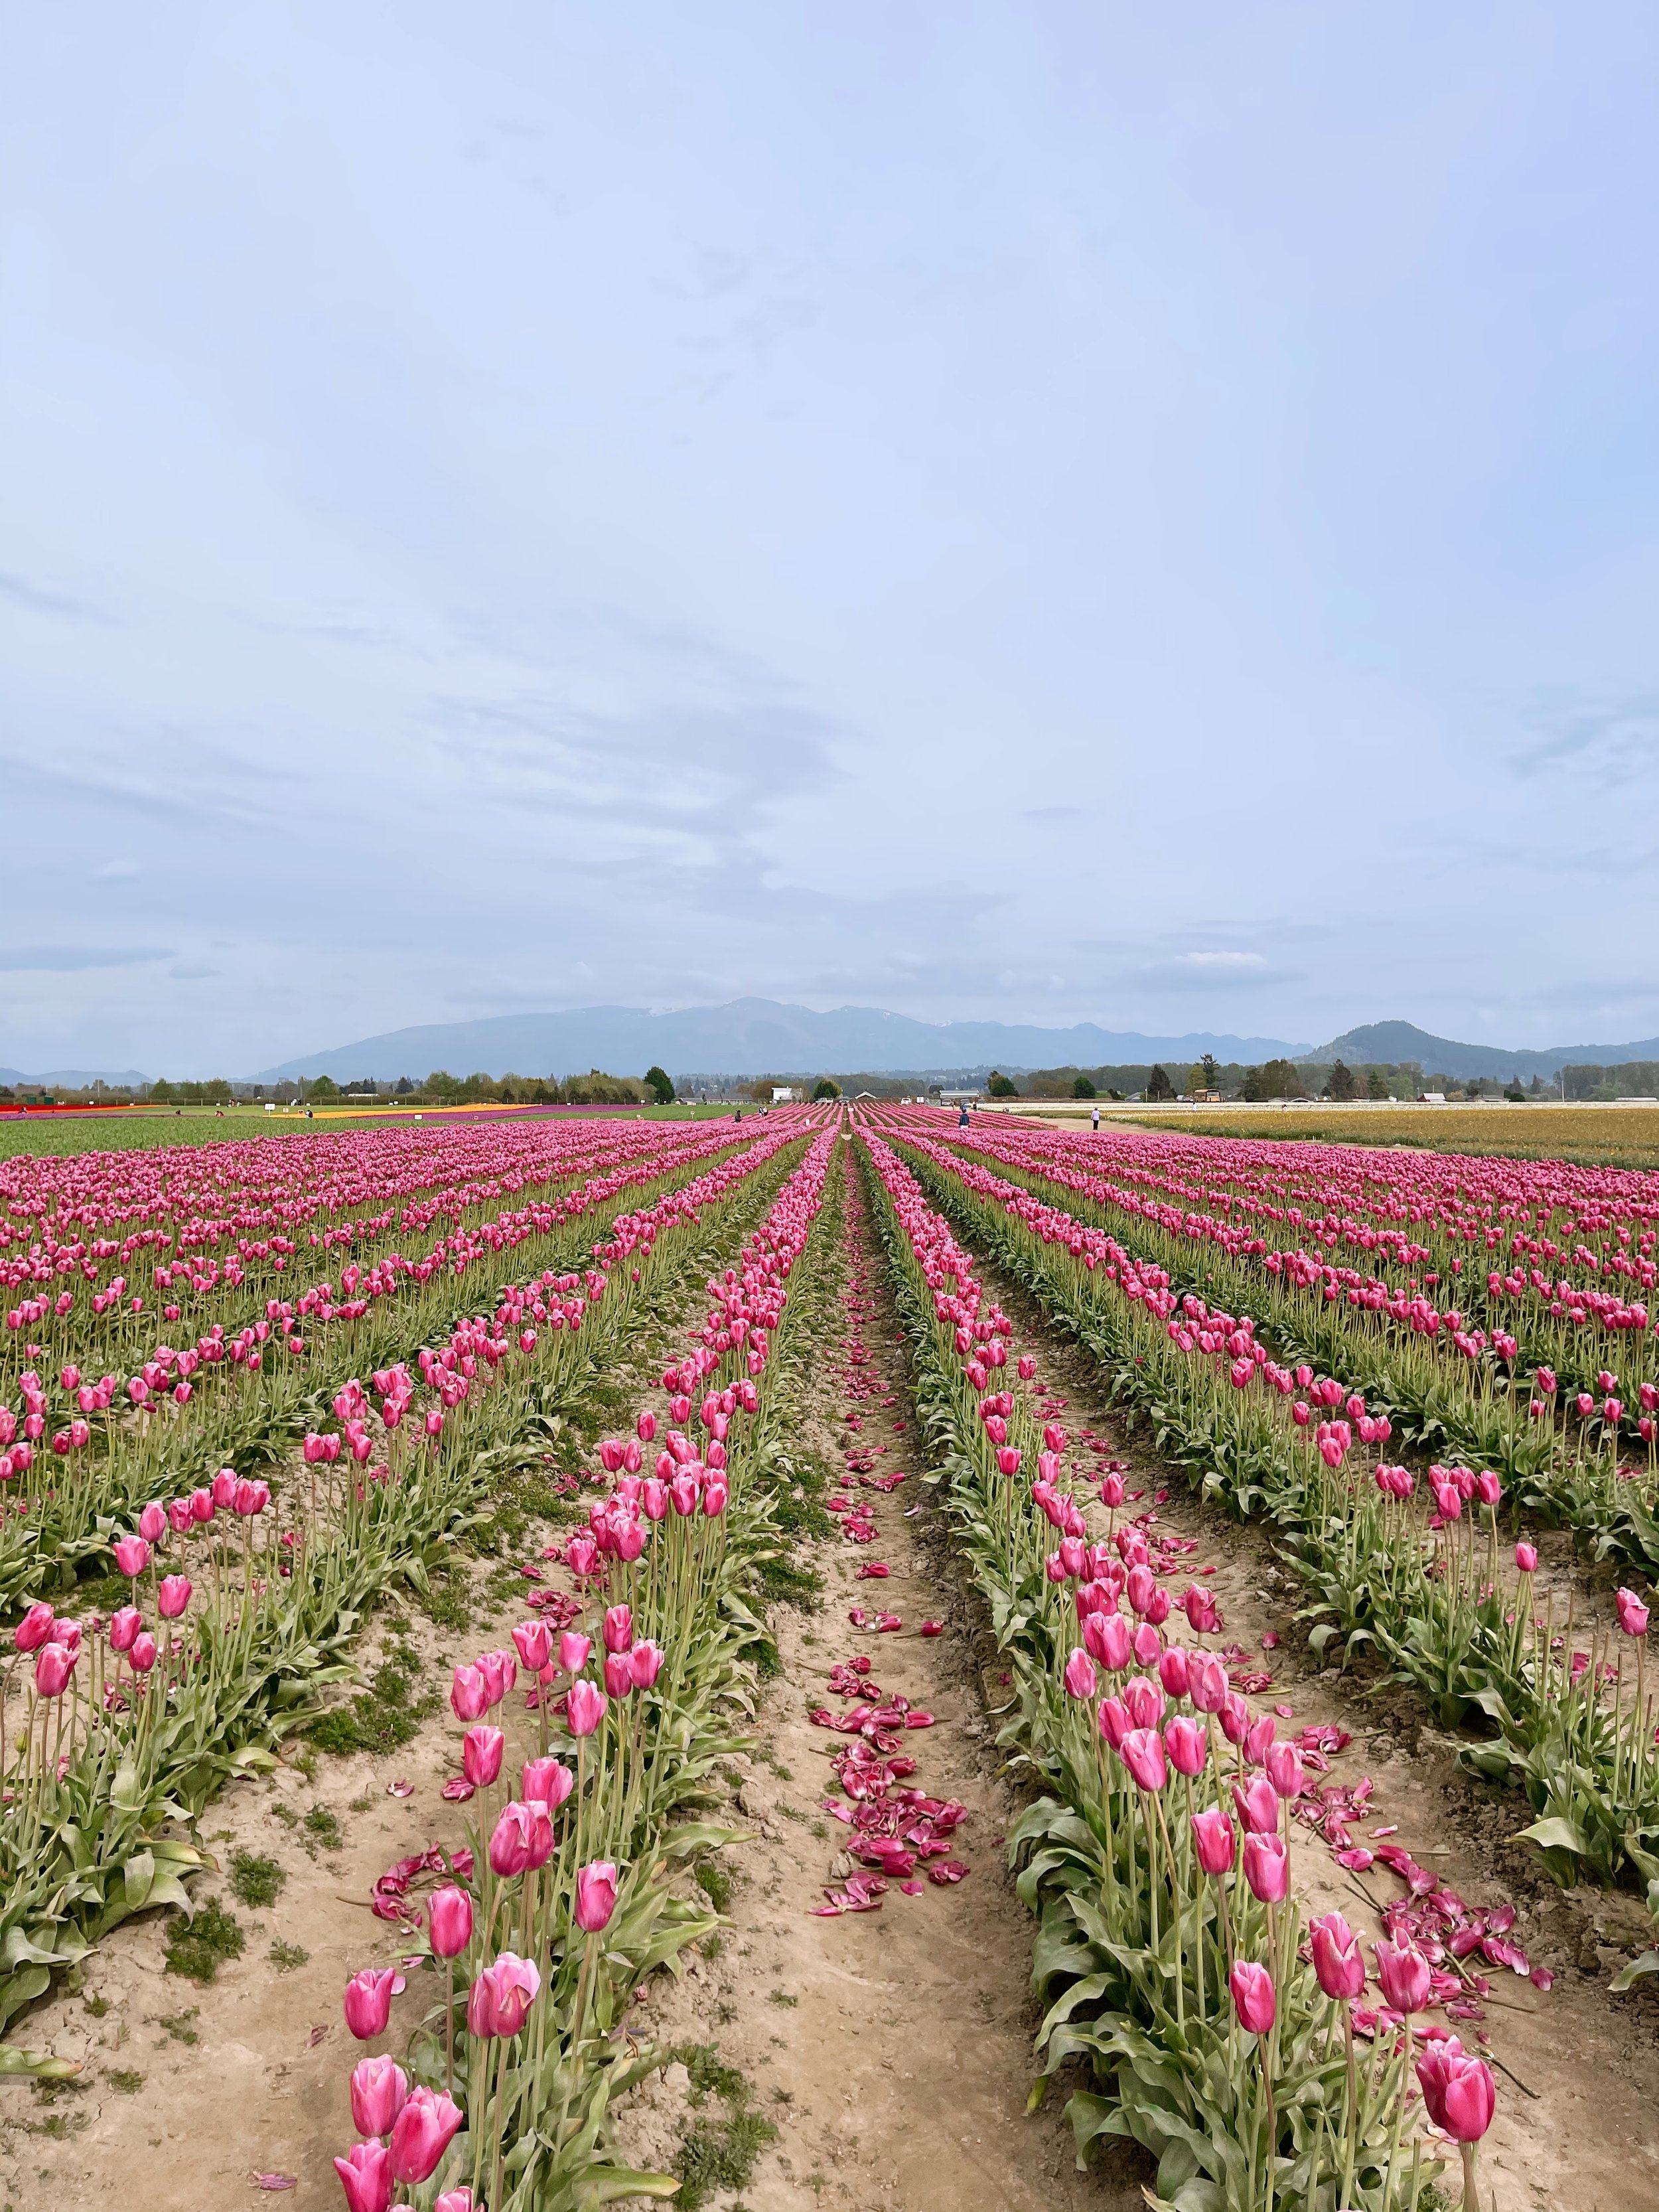 What To Do In Washington State This Spring & Summer - Tulips - Bre Sheppard.JPG